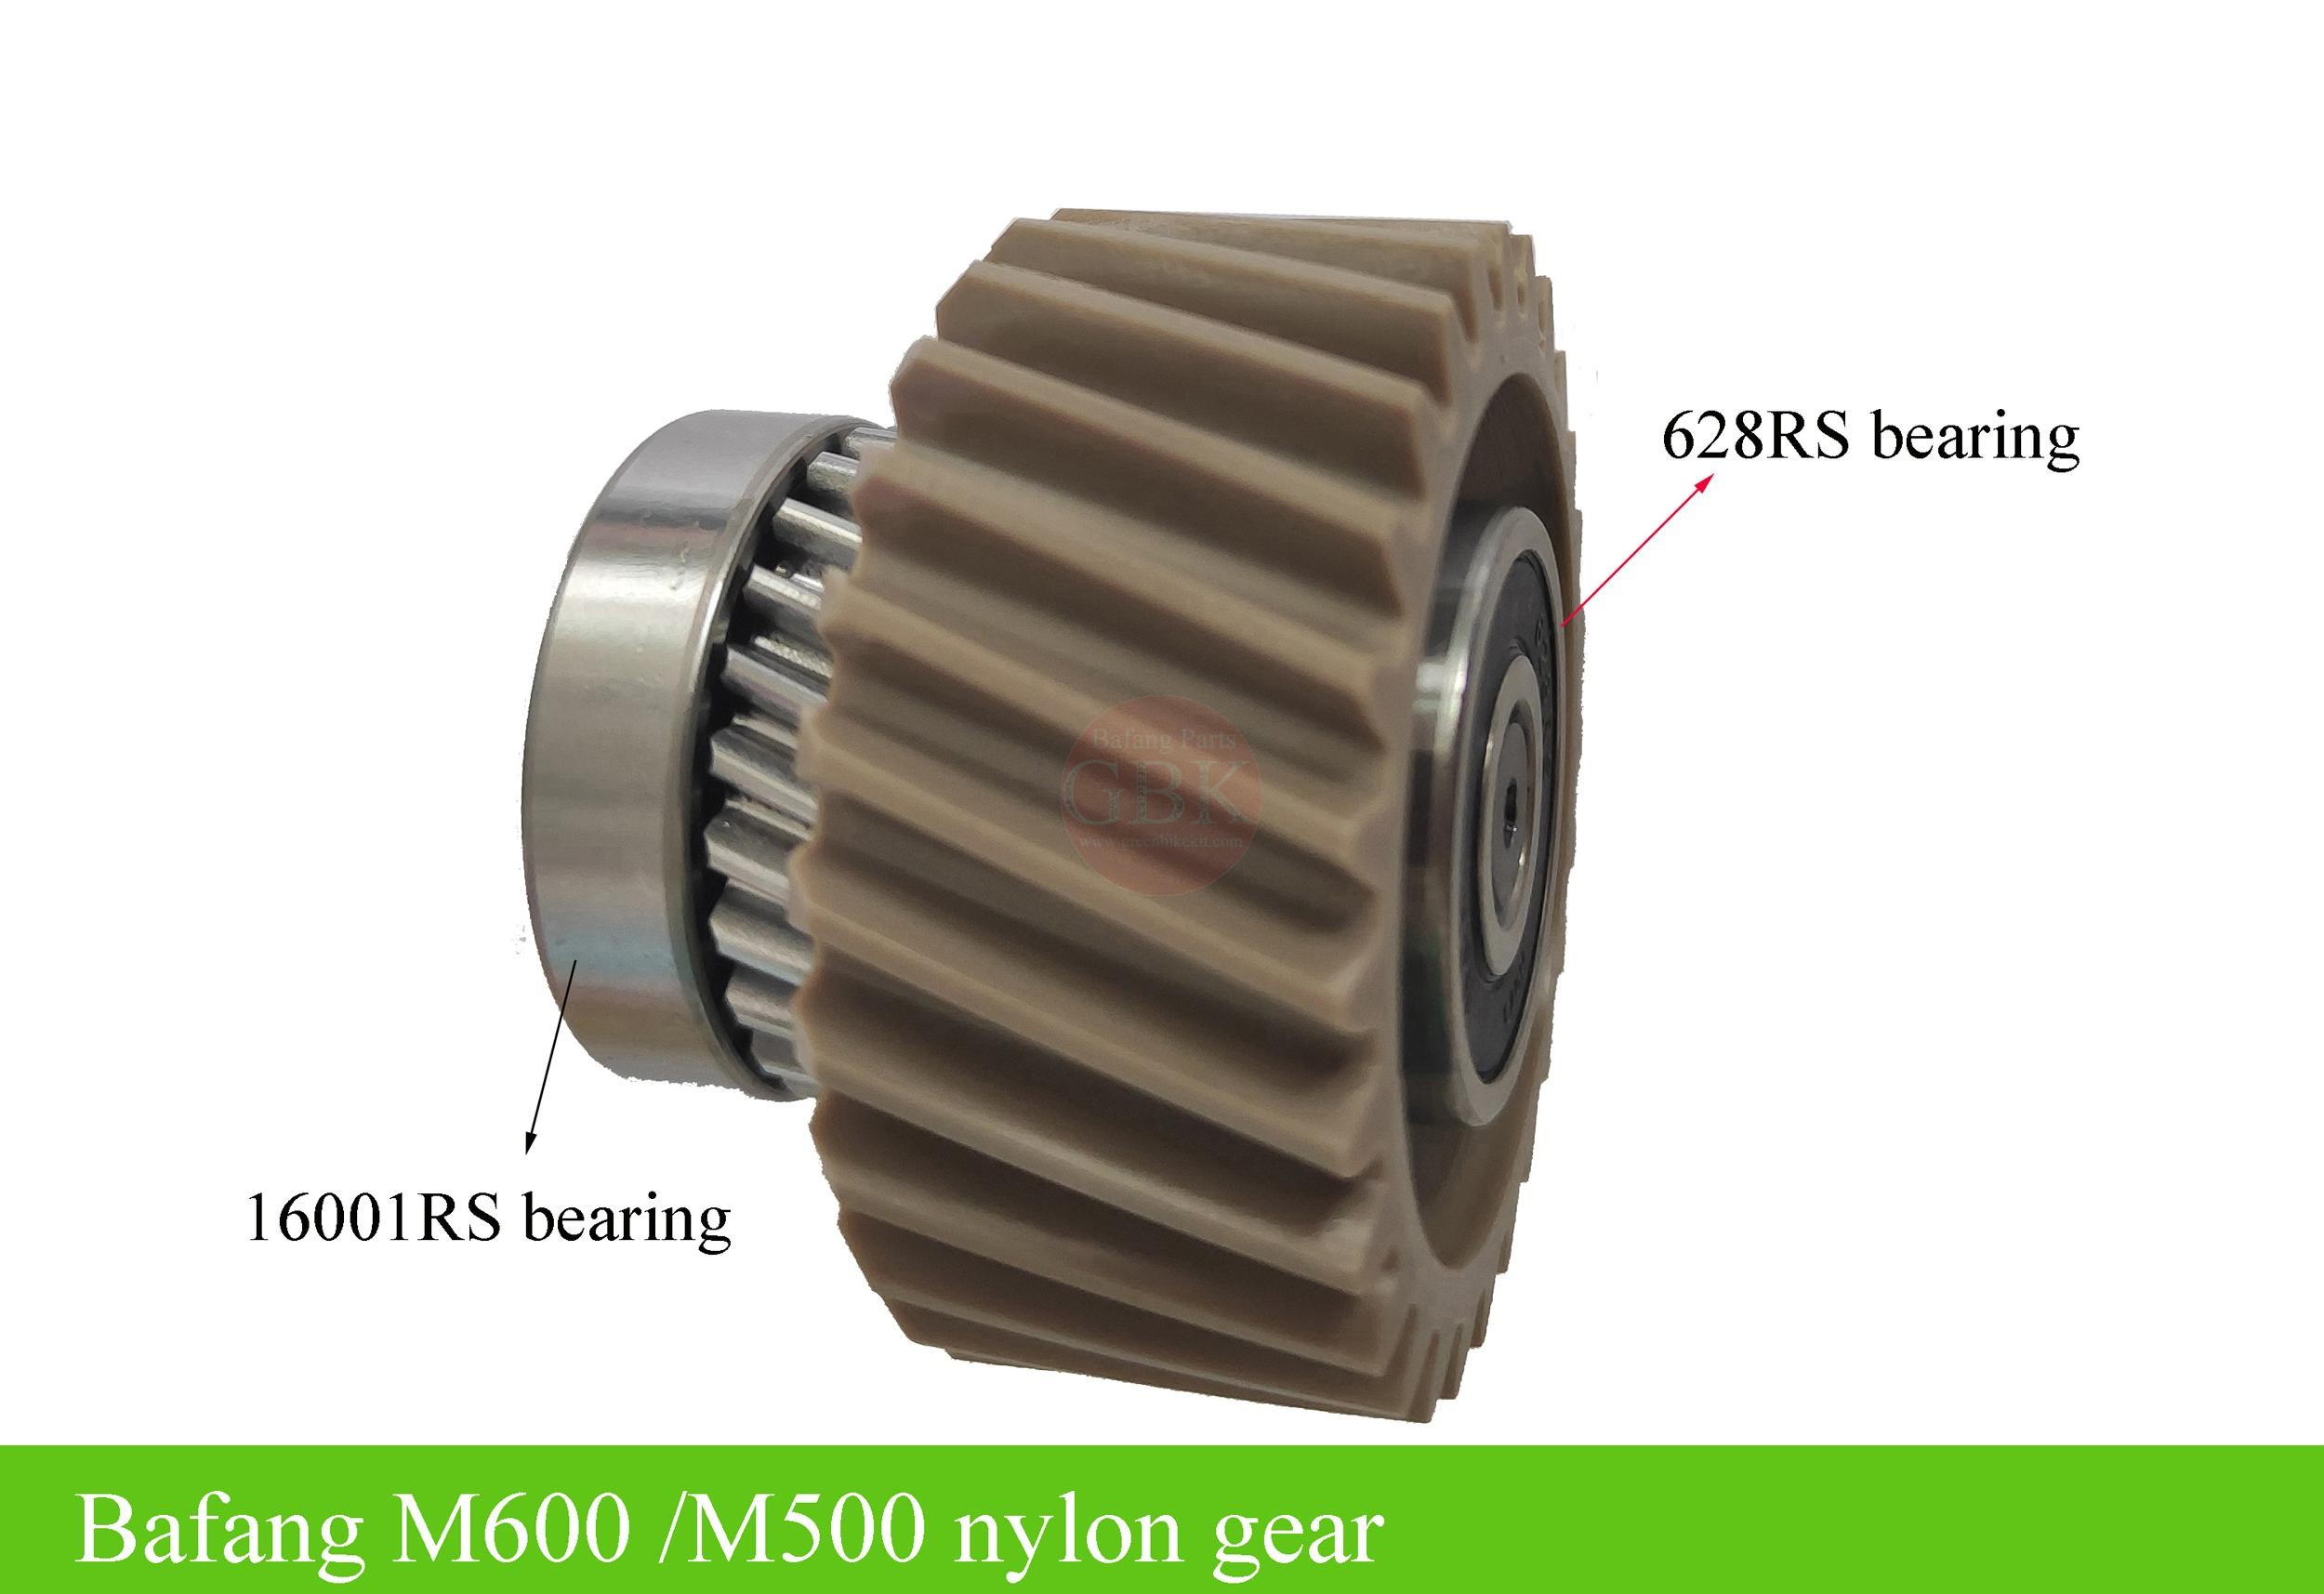 bafang-M600-M500-Nylon-gear-for-replacement